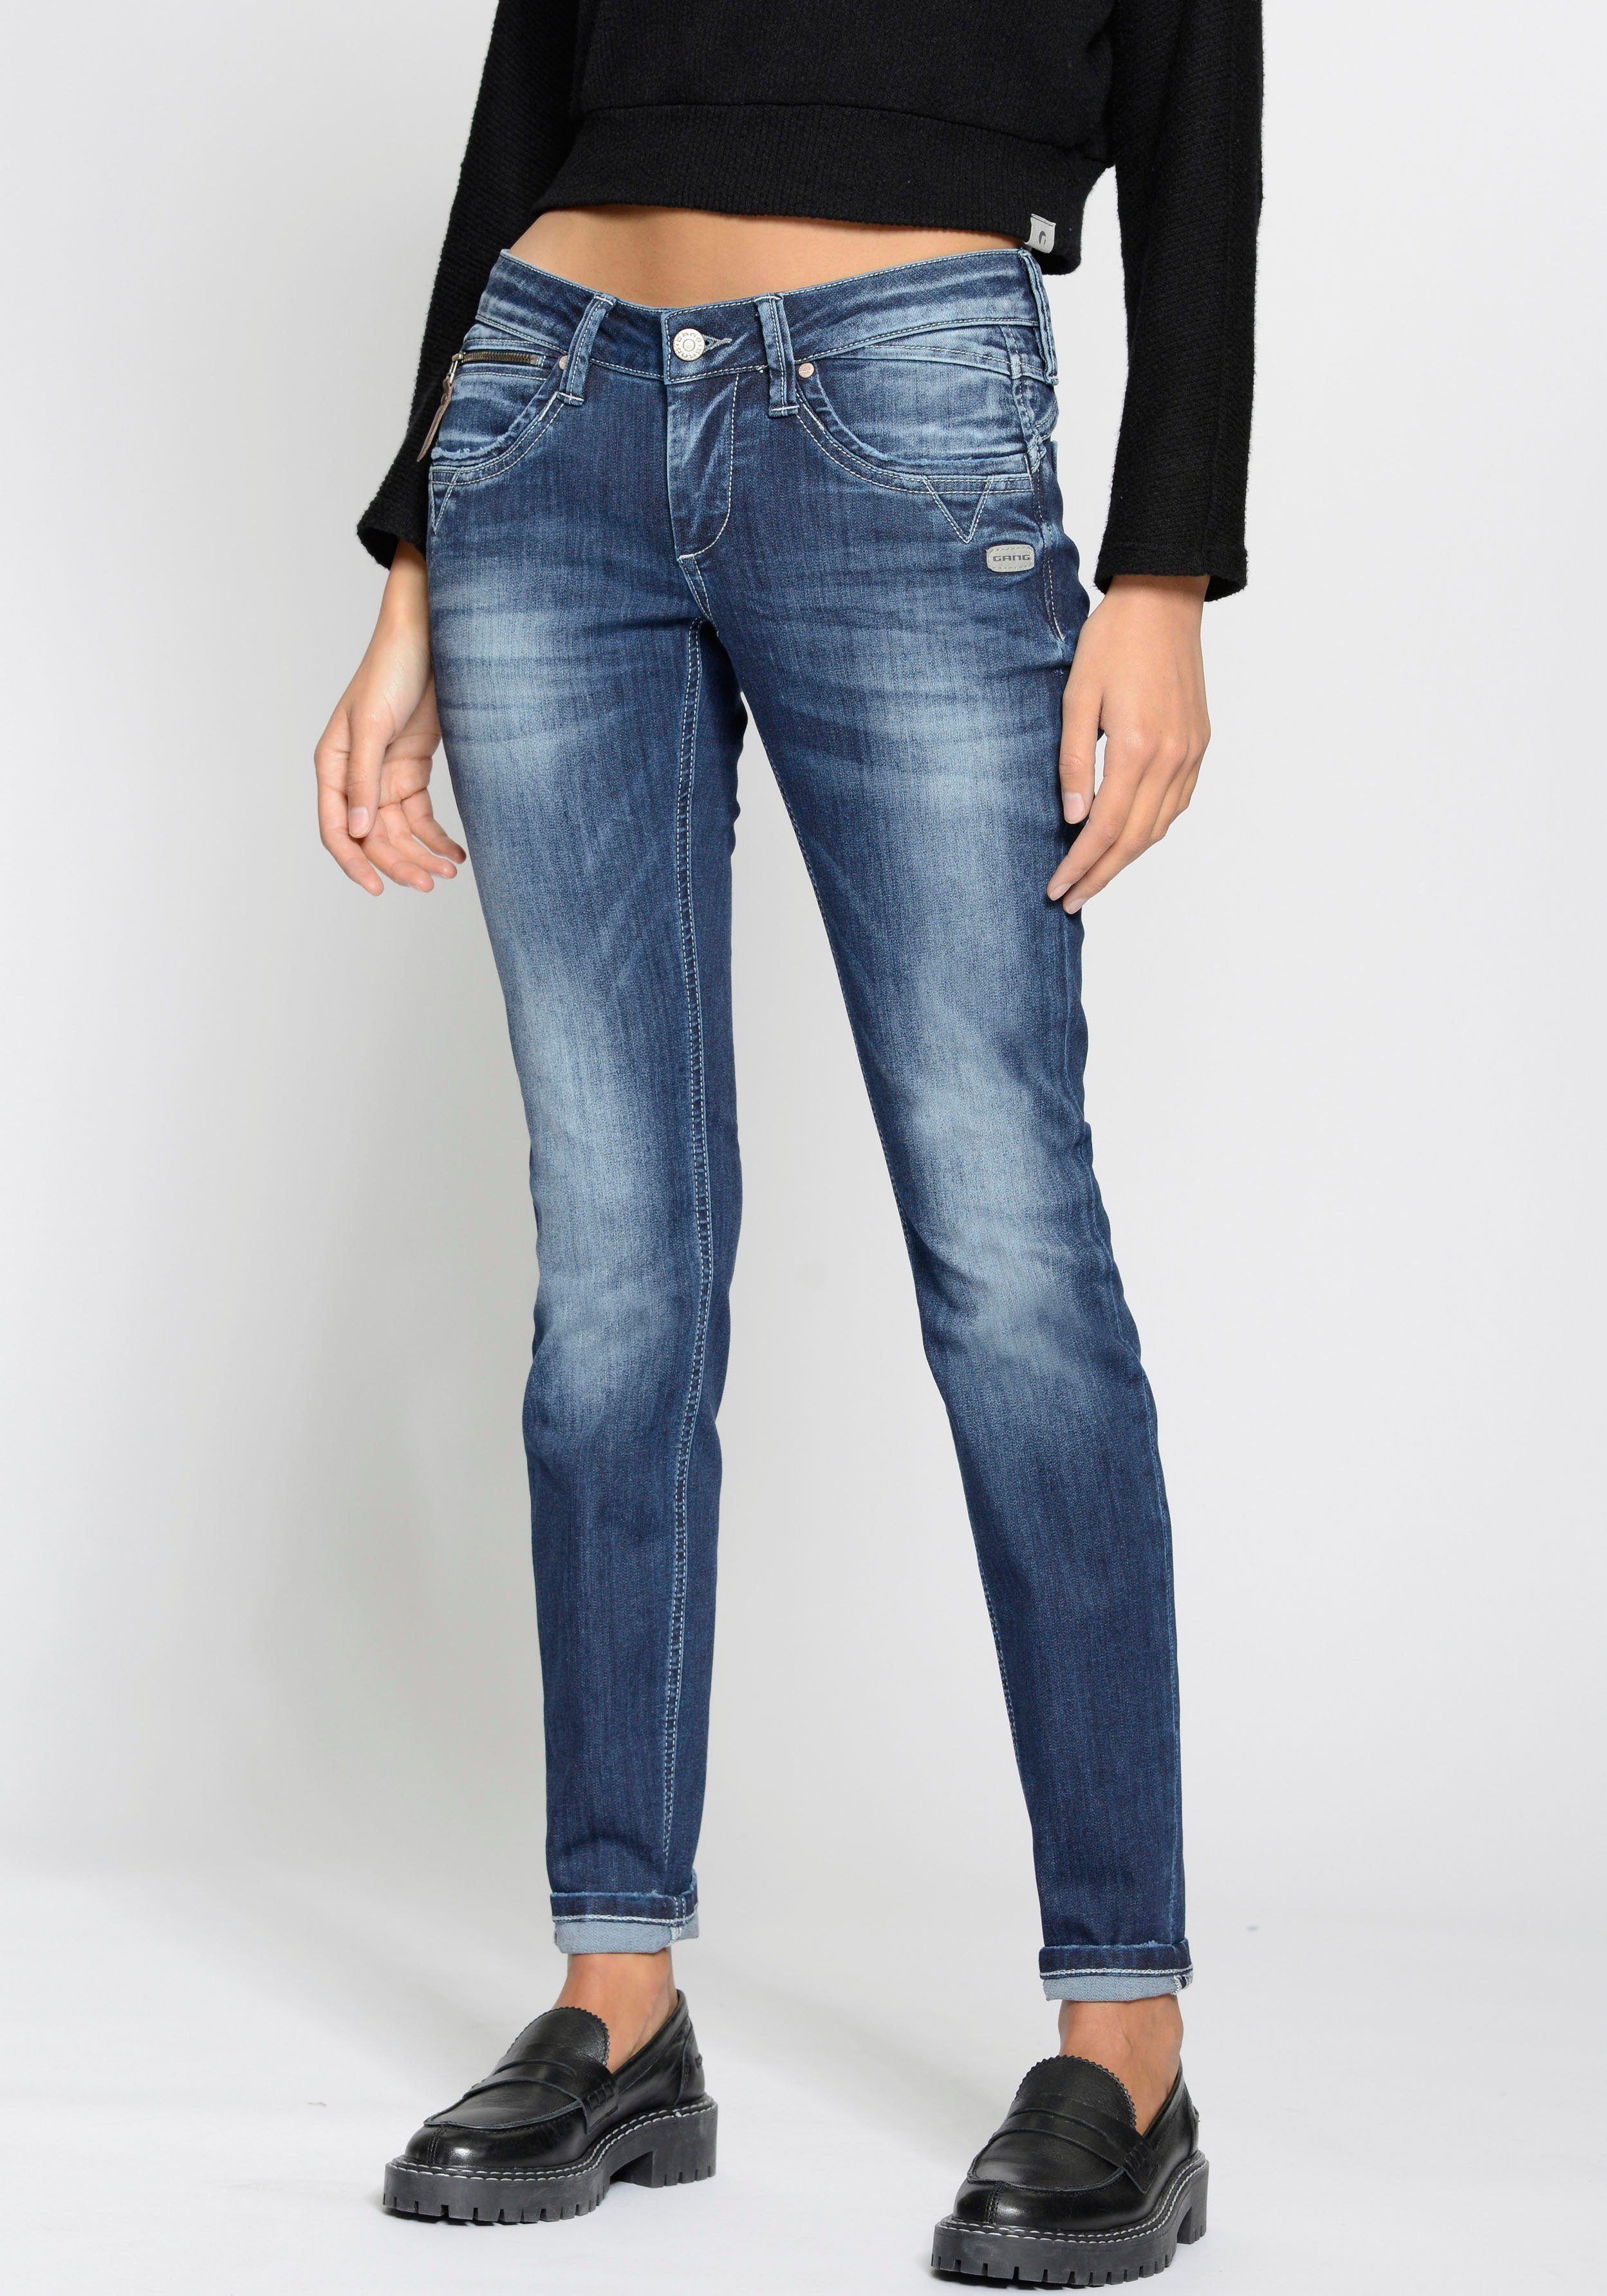 GANG Skinny-fit-Jeans 94Nikita mit Zipper-Detail an der Coinpocket midbase | Skinny Jeans